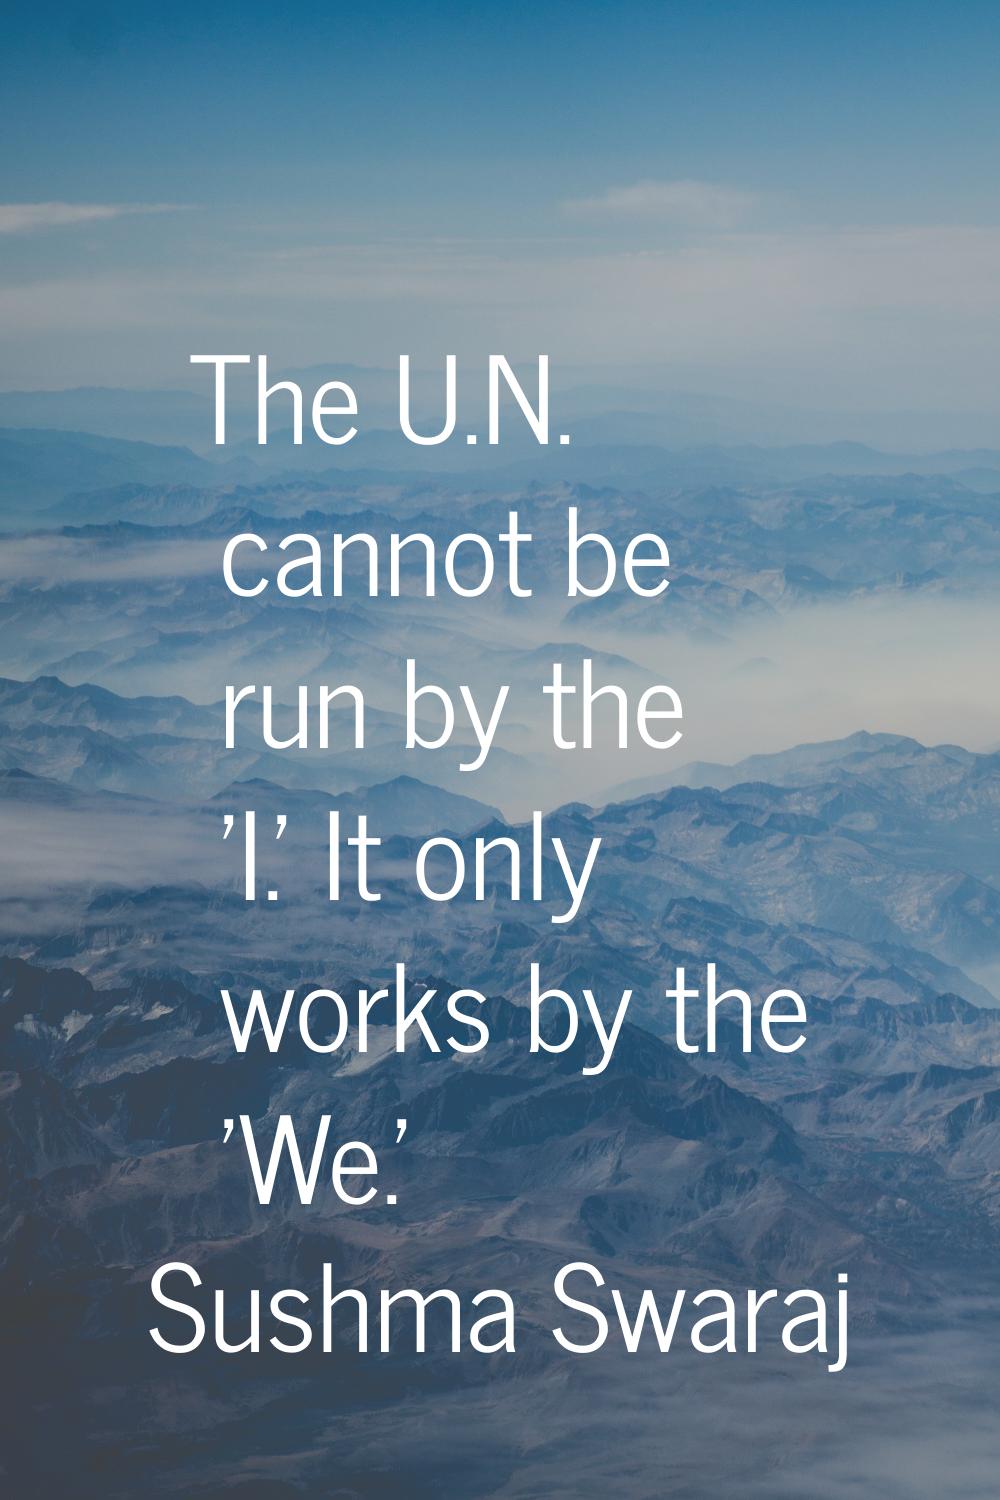 The U.N. cannot be run by the 'I.' It only works by the 'We.'